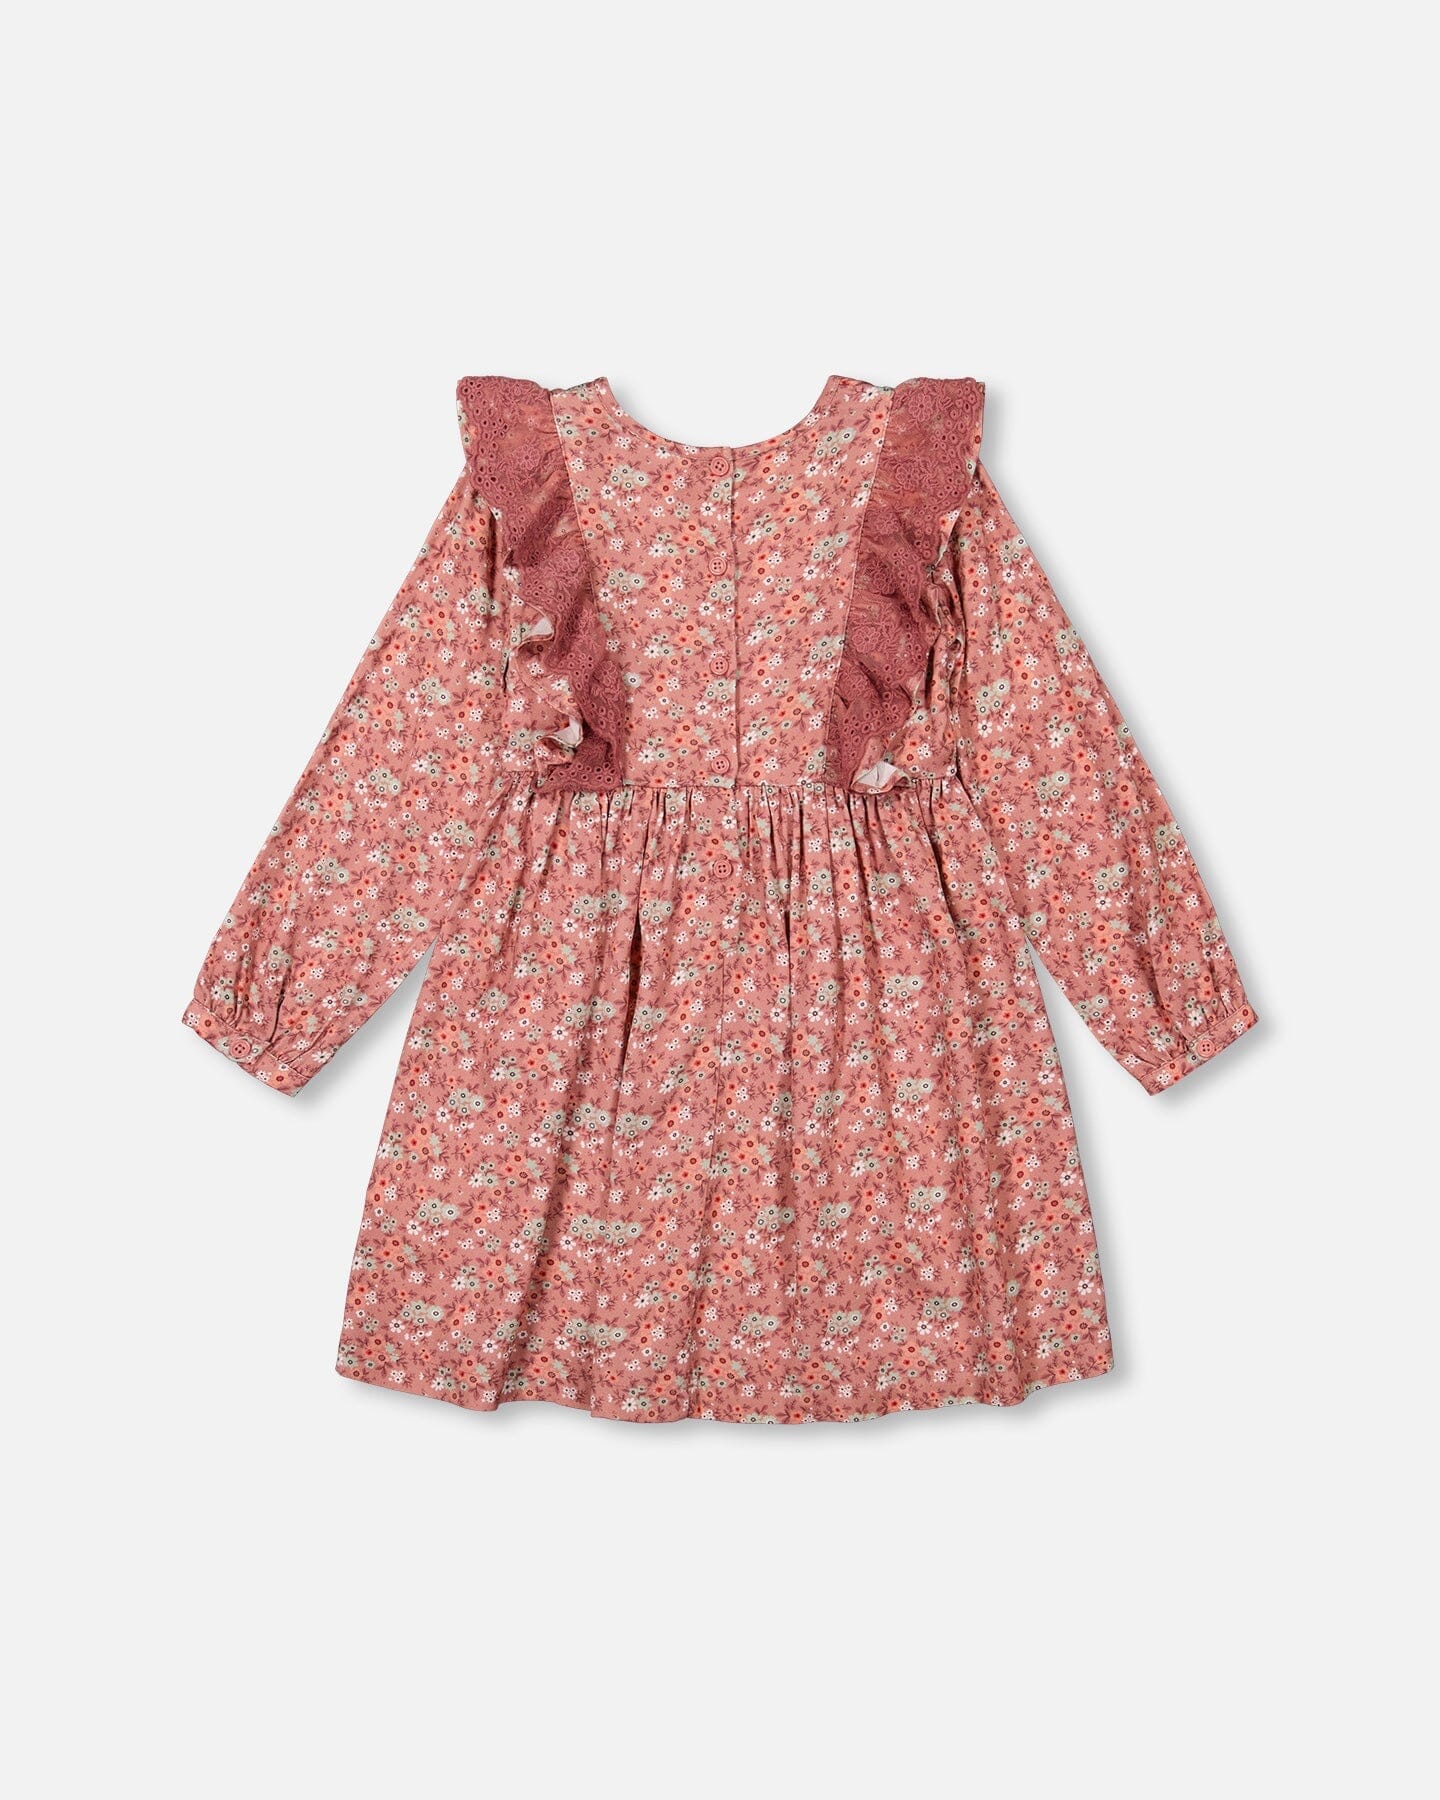 Printed Woven Dress With Frills Dusty Mauve Floral Print - F20G88_031